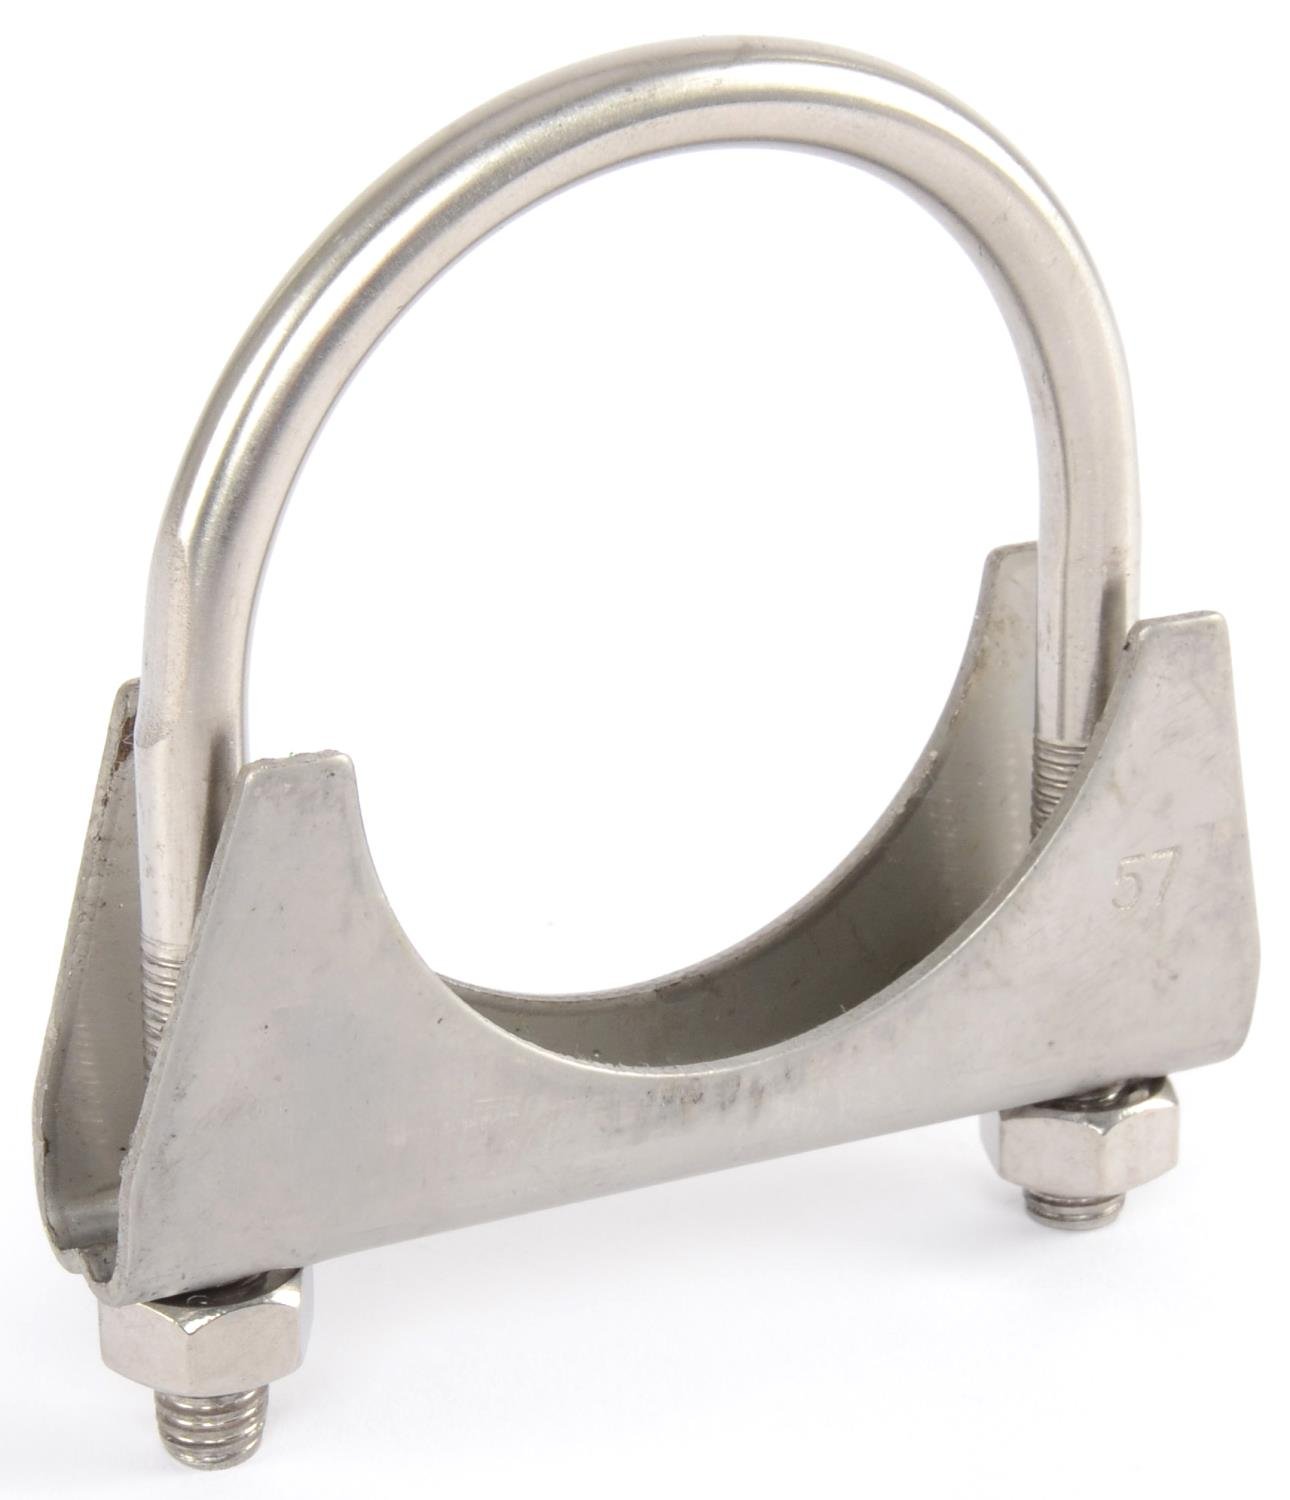 Stainless Steel U-Clamp for 2-1/4" OD Pipe